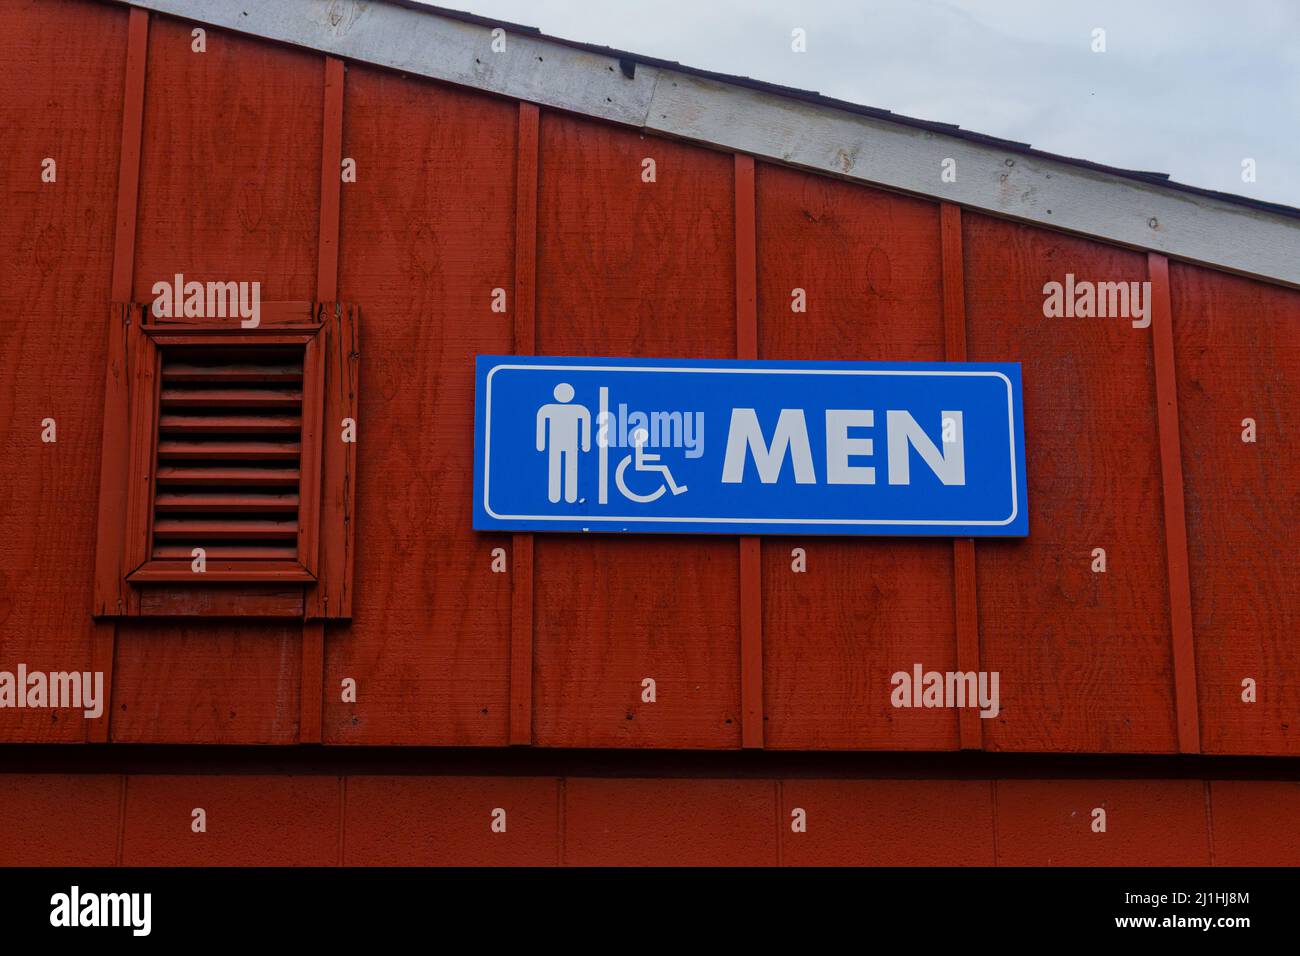 Men’s bathroom sign on the top of a building next to roof, colored blue and white in front of red wall. Stock Photo